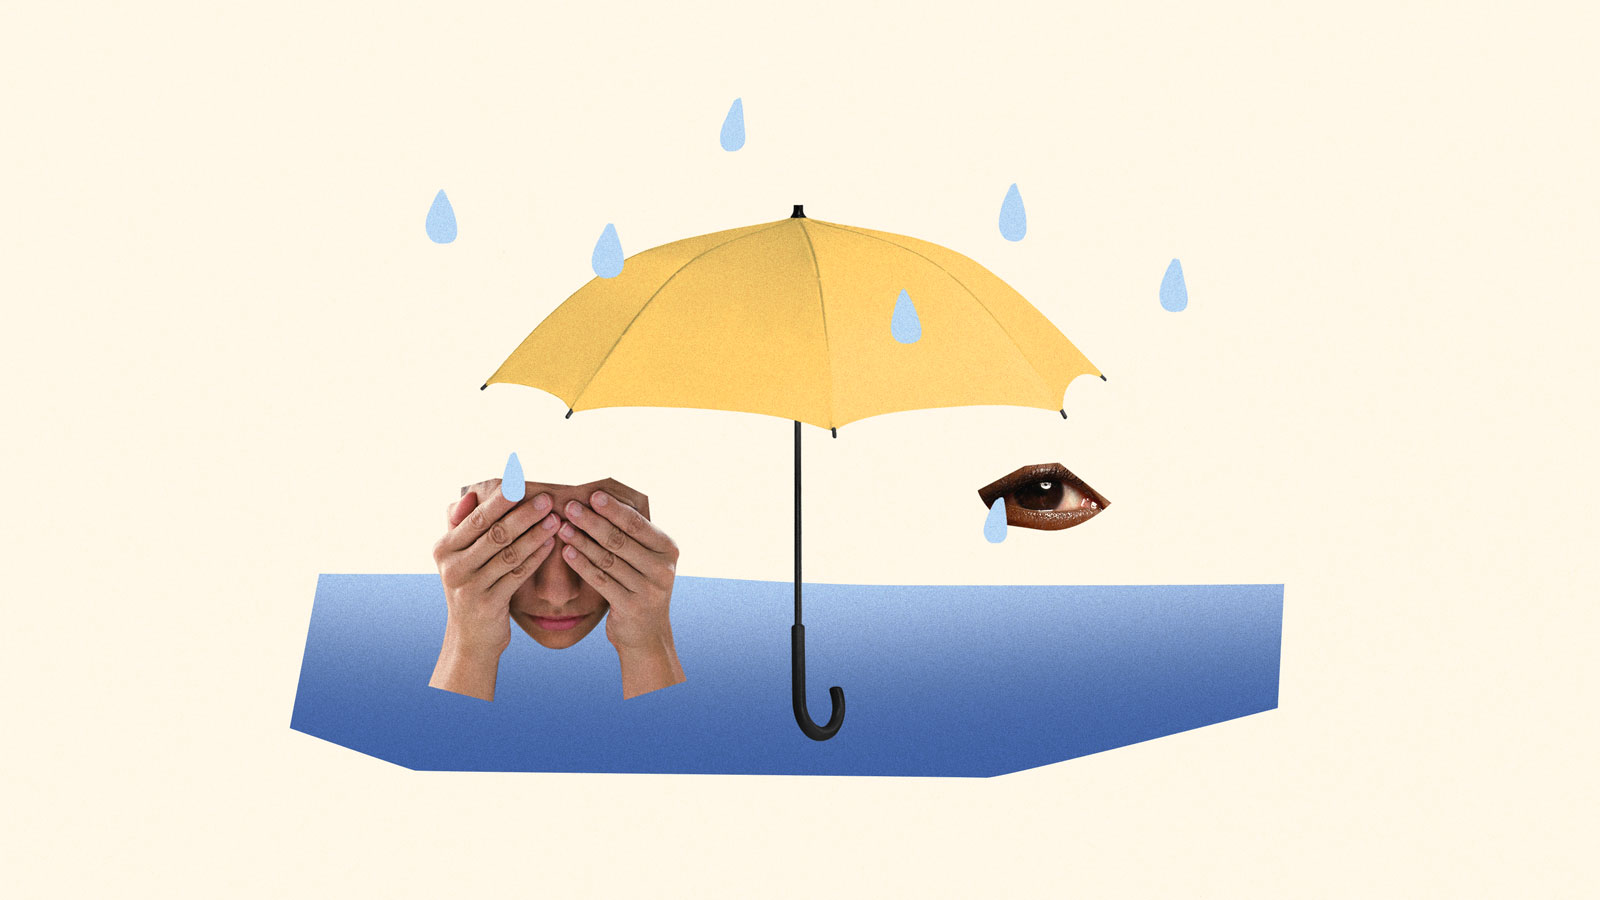 An umbrella tries to protect two anxious and sad people from raindrops